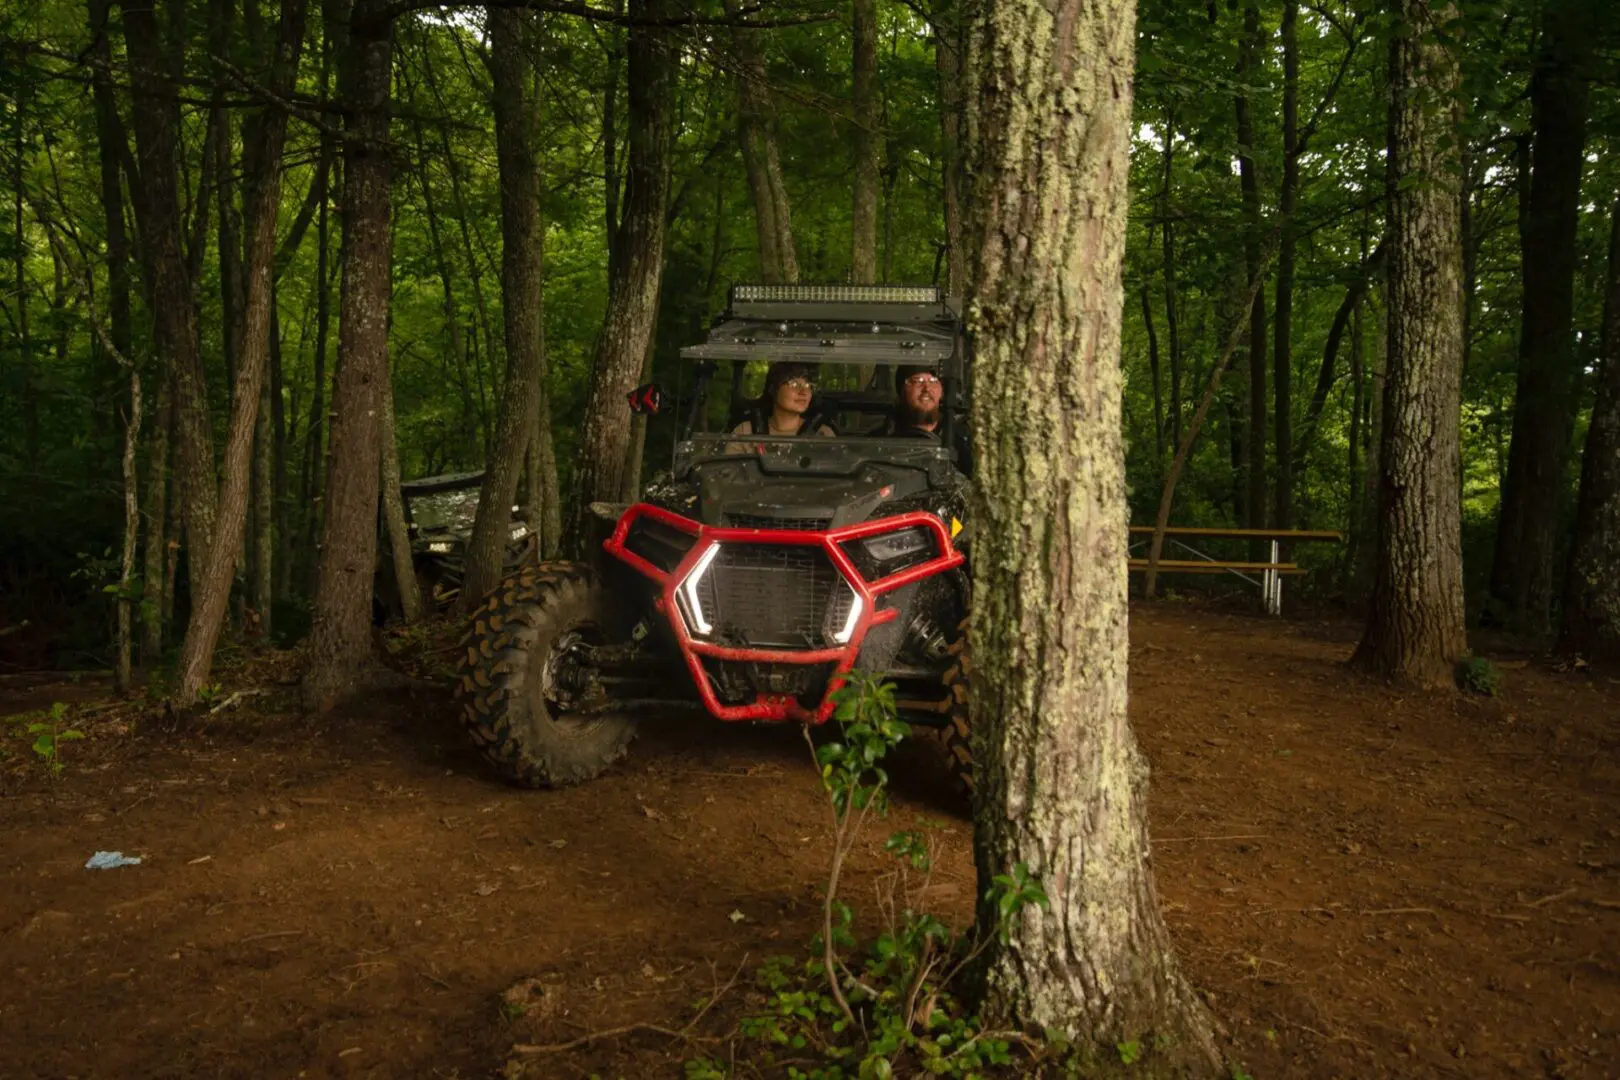 Two people in a red and black vehicle parked on the side of a forest.